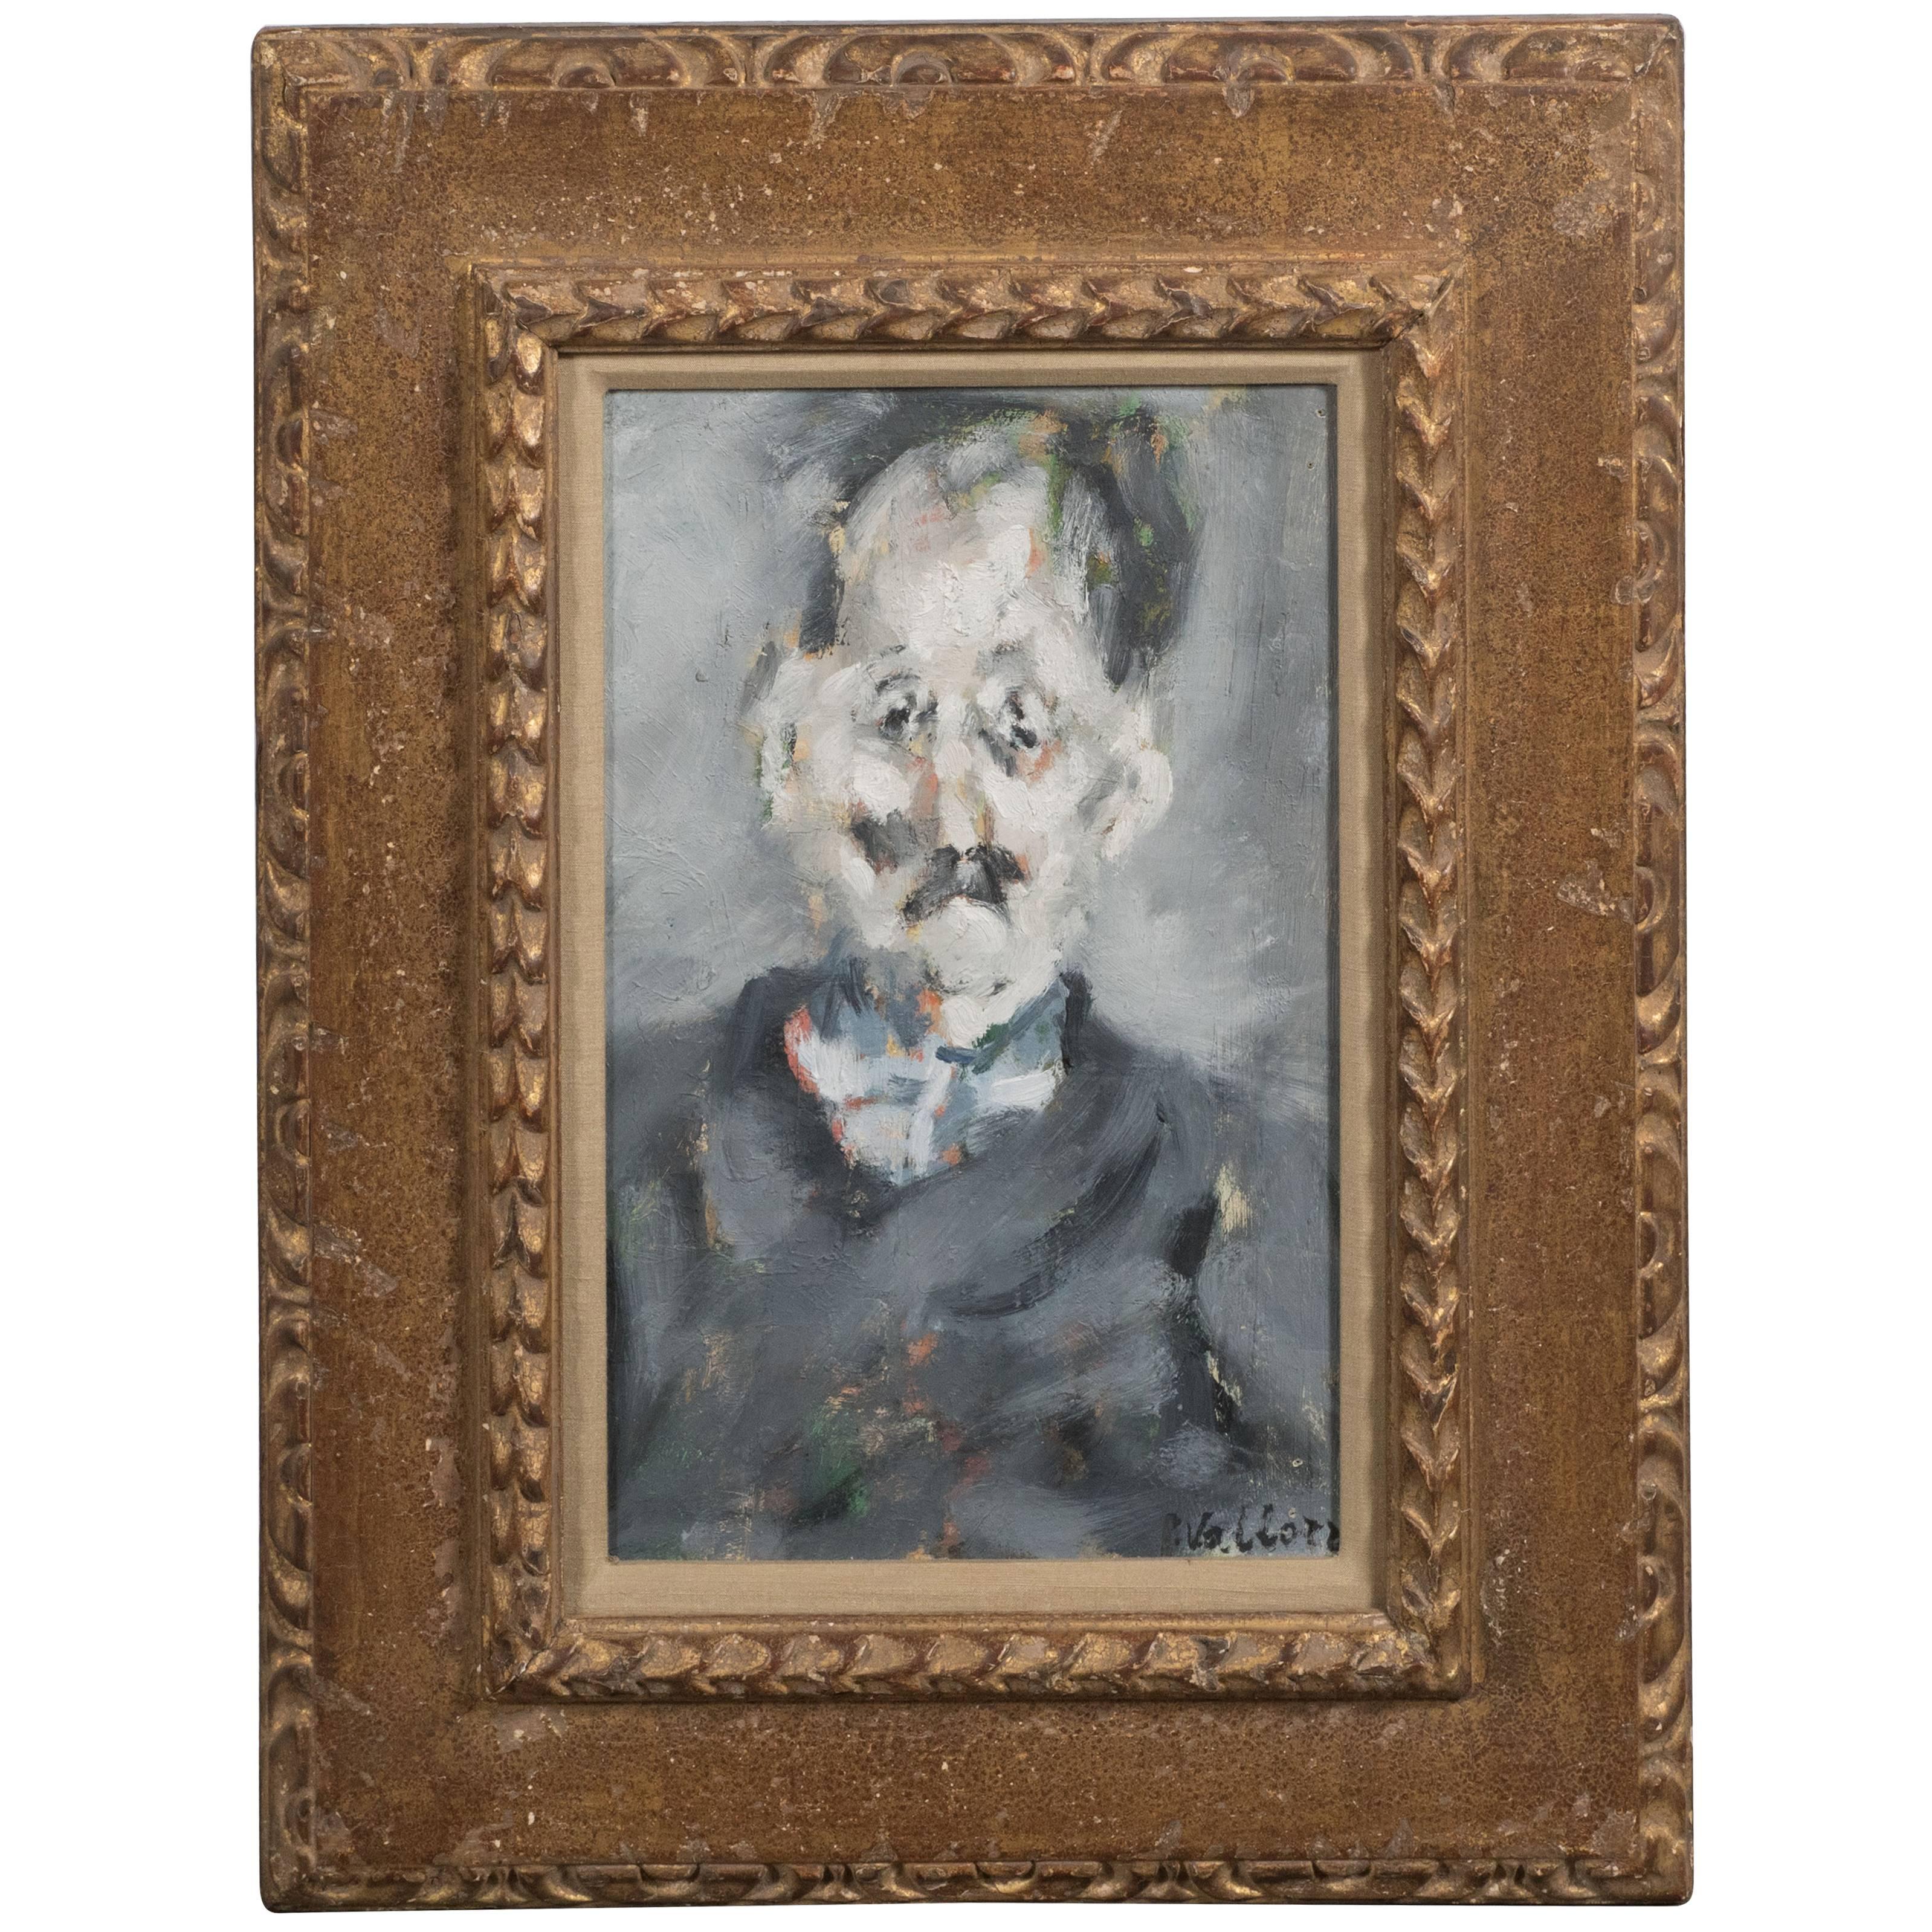 Paolo Vallorz Portrait of an Old Man of Mignardot, Oil on Canvas Dated 1964